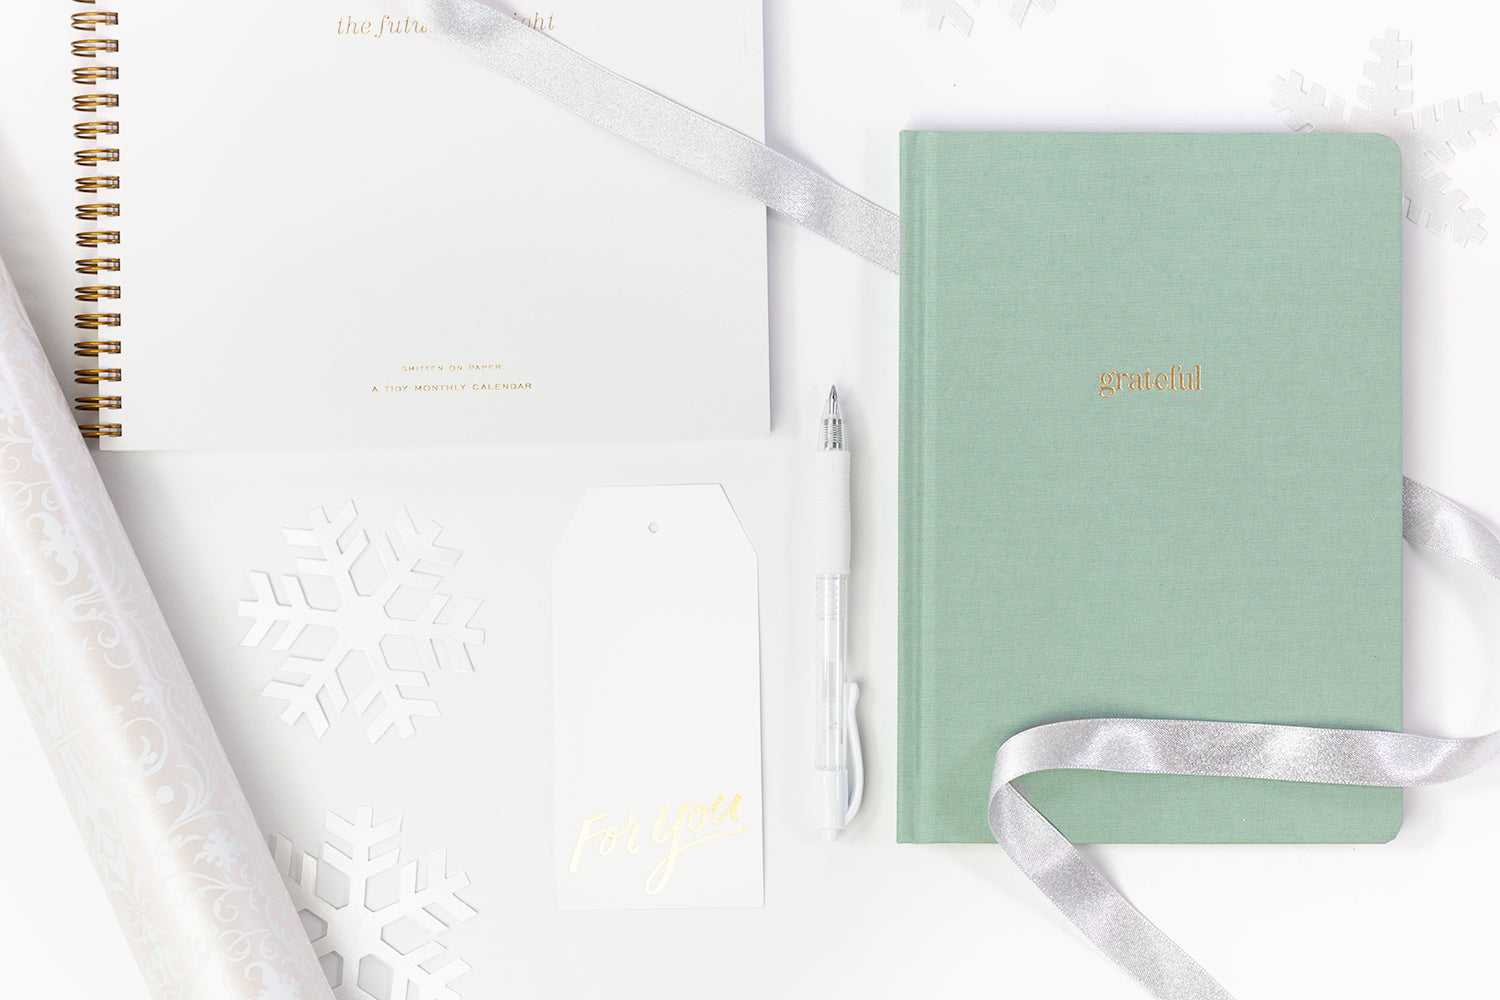 An array of inexpensive gifts for coworkers including a notebook, planner, and pen.